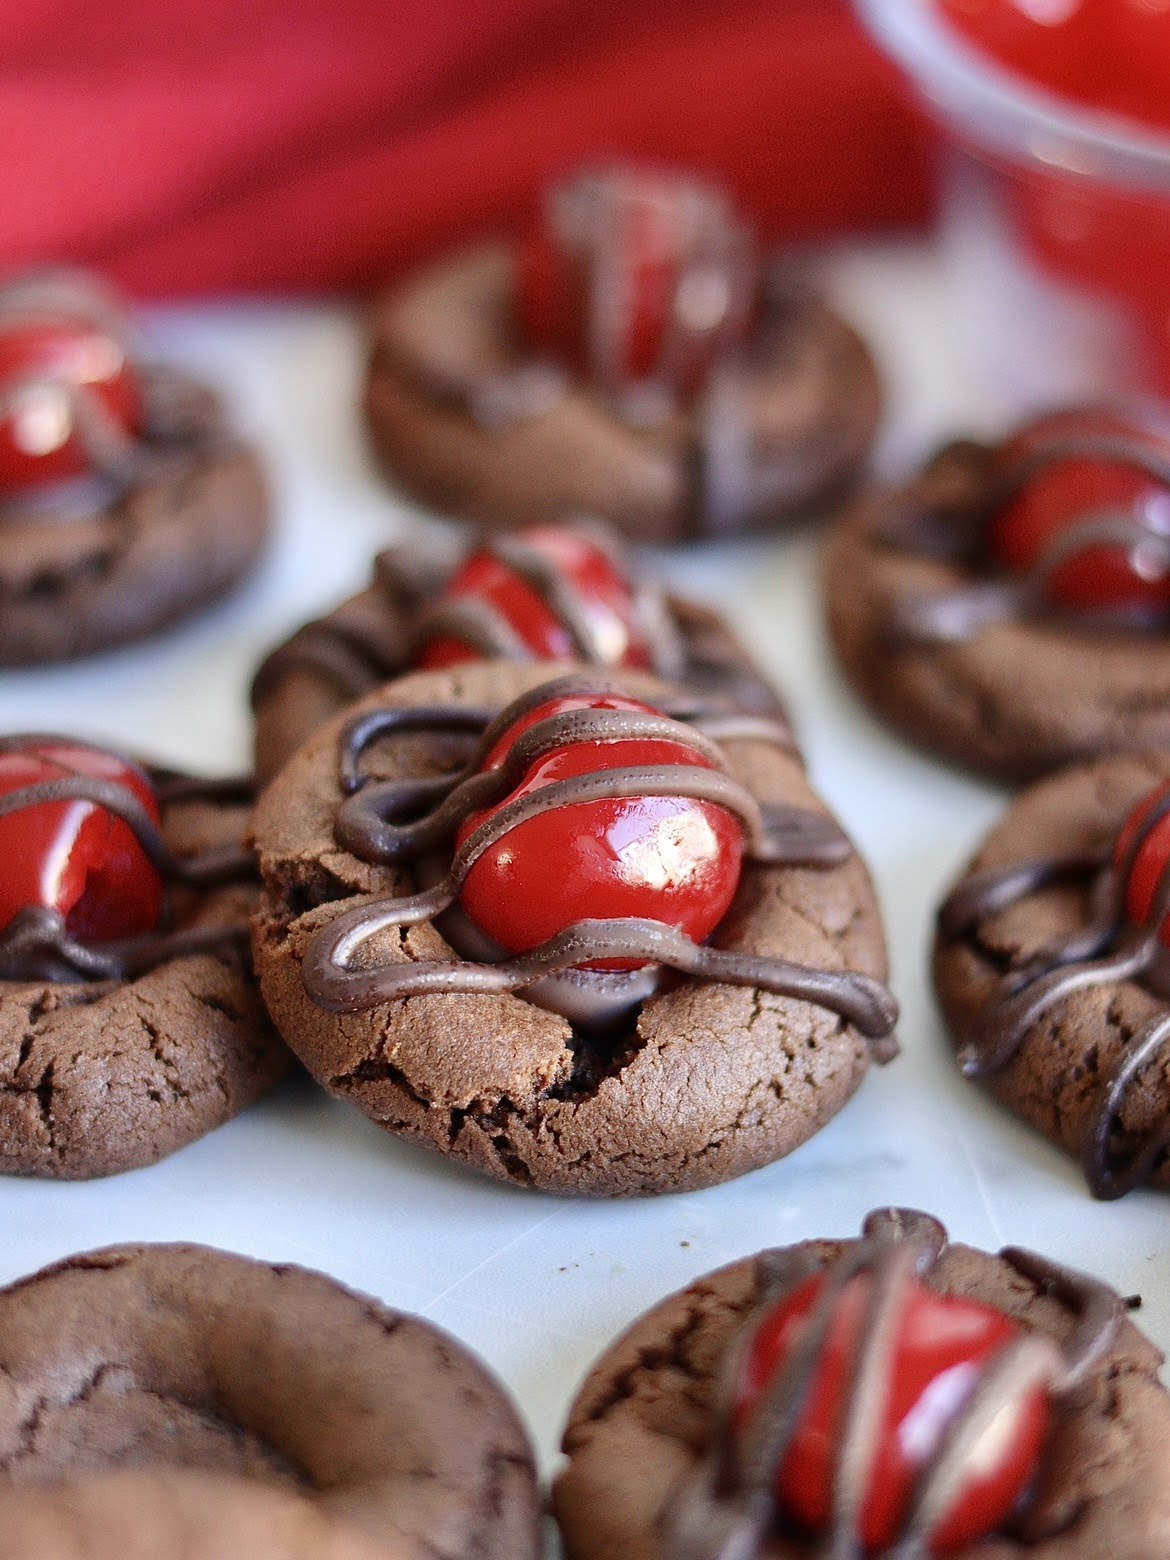 A close up photo of a finished chocolate covered cherry cookie